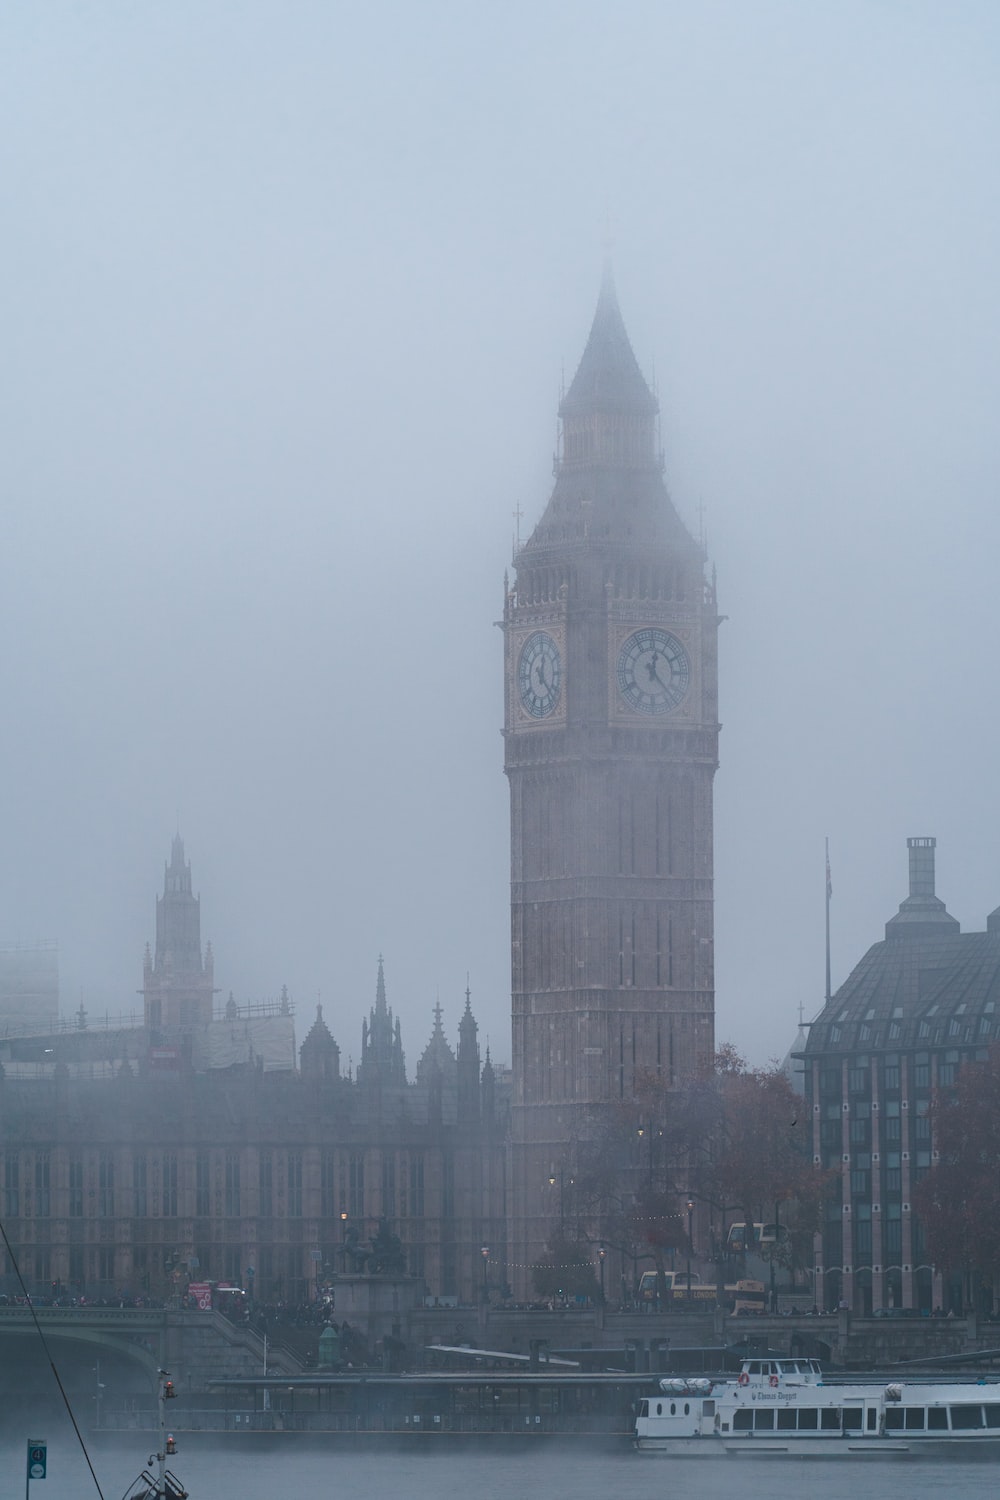 a large clock tower towering over a city on a foggy day